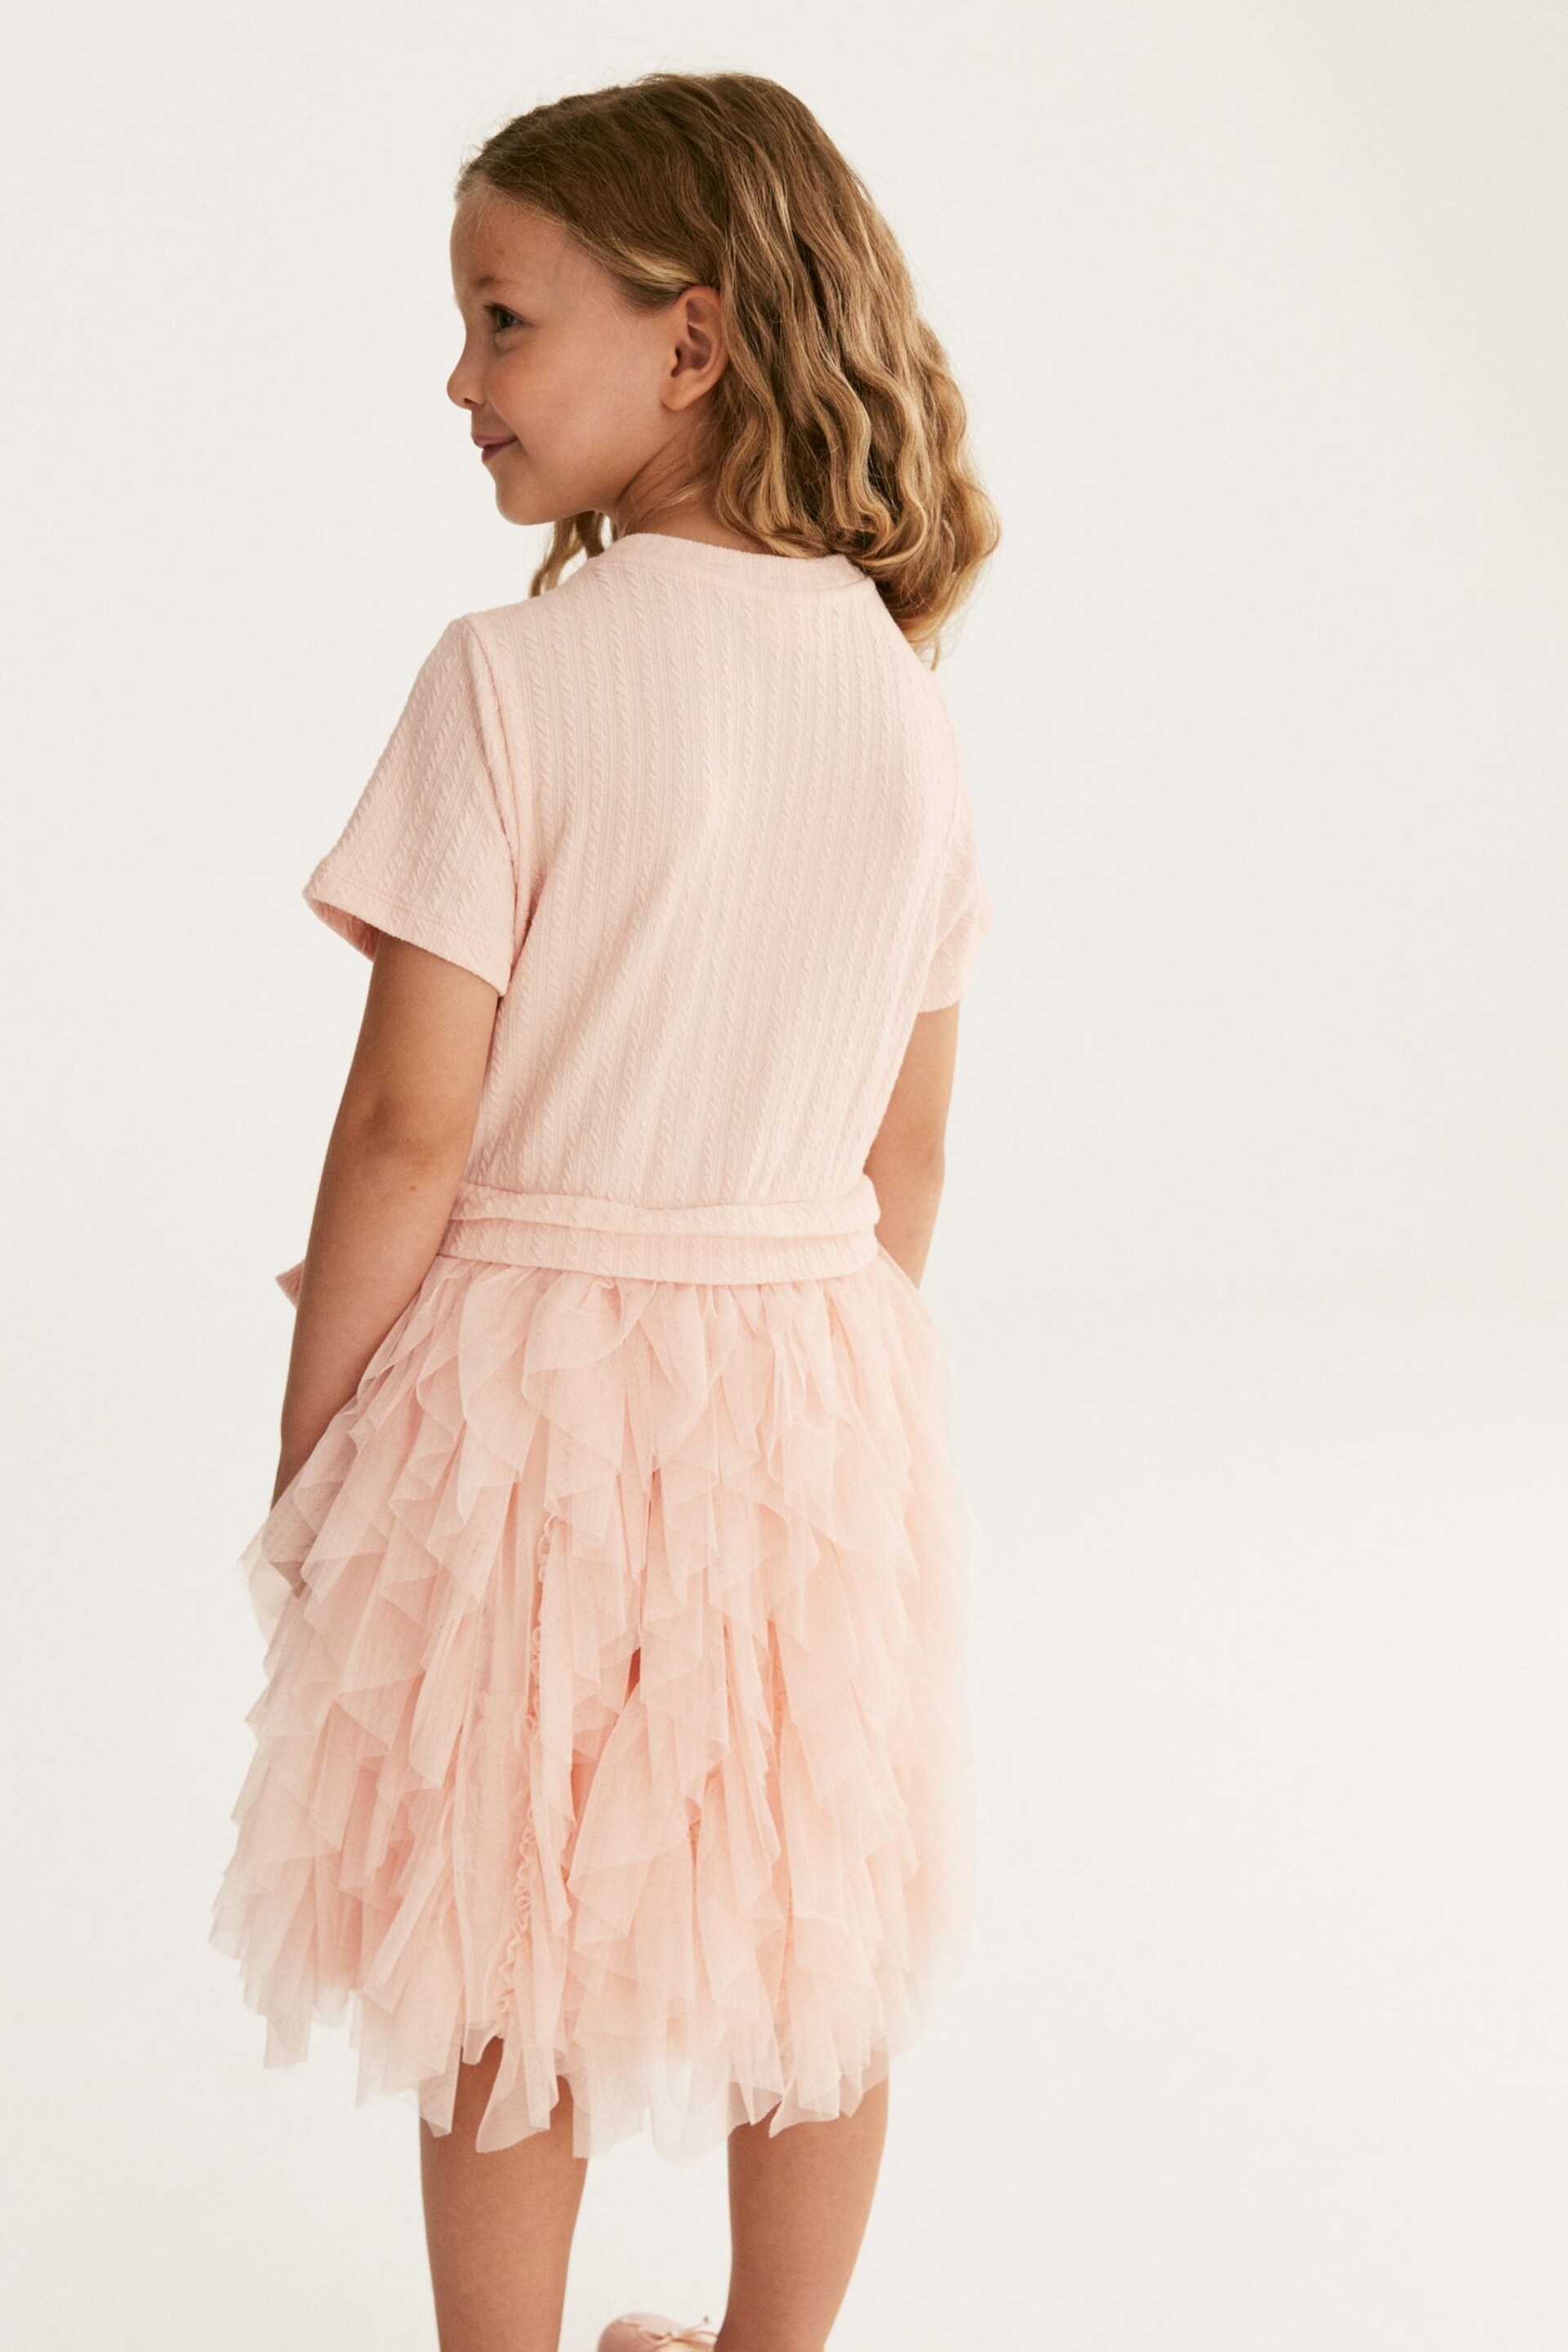 Pink Textured Mesh Frill Dress (3-12yrs) - Image 6 of 7